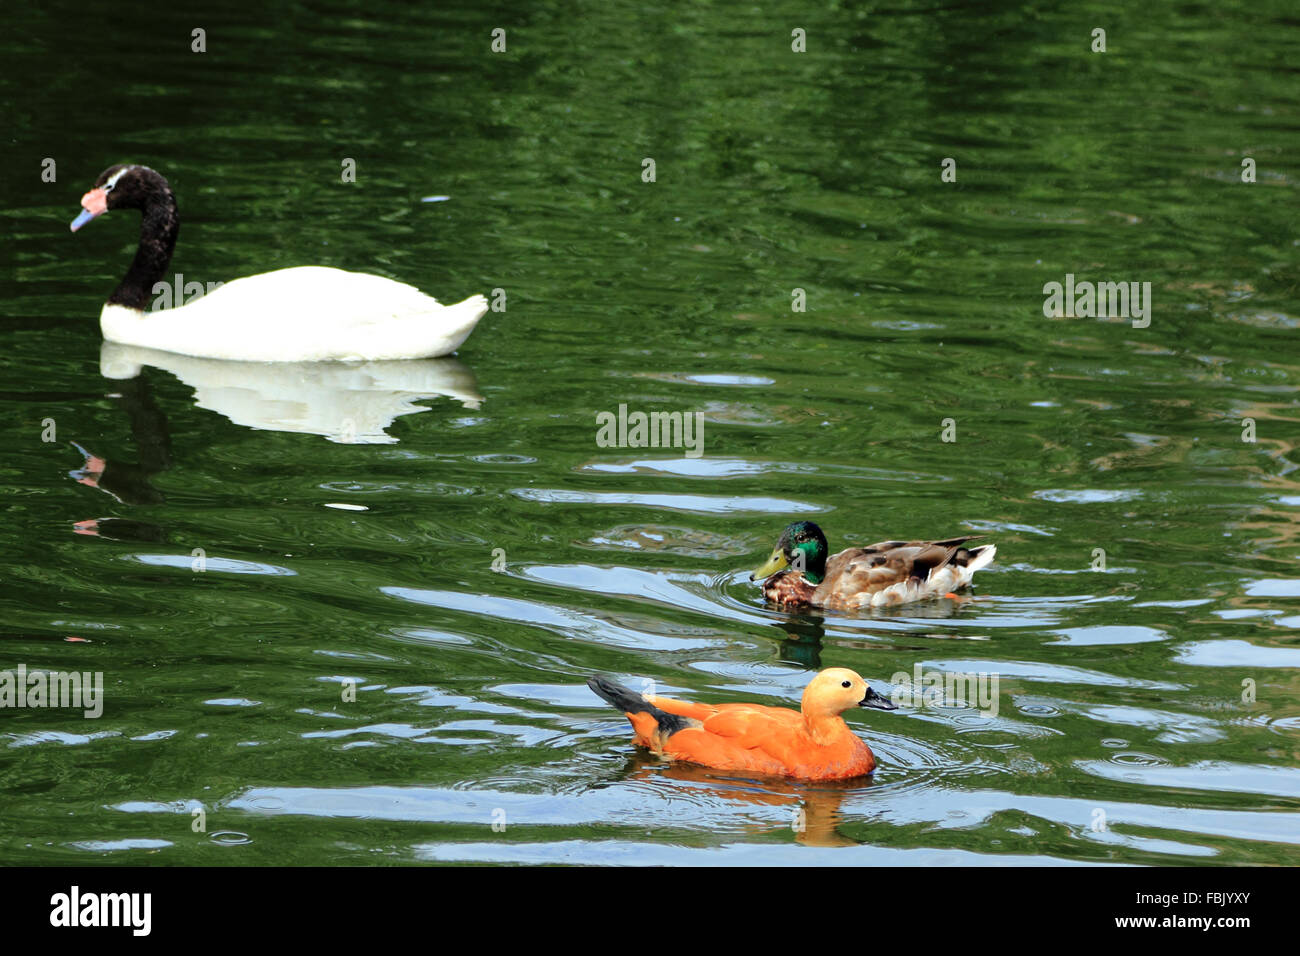 White duck swimming in the lake Stock Photo